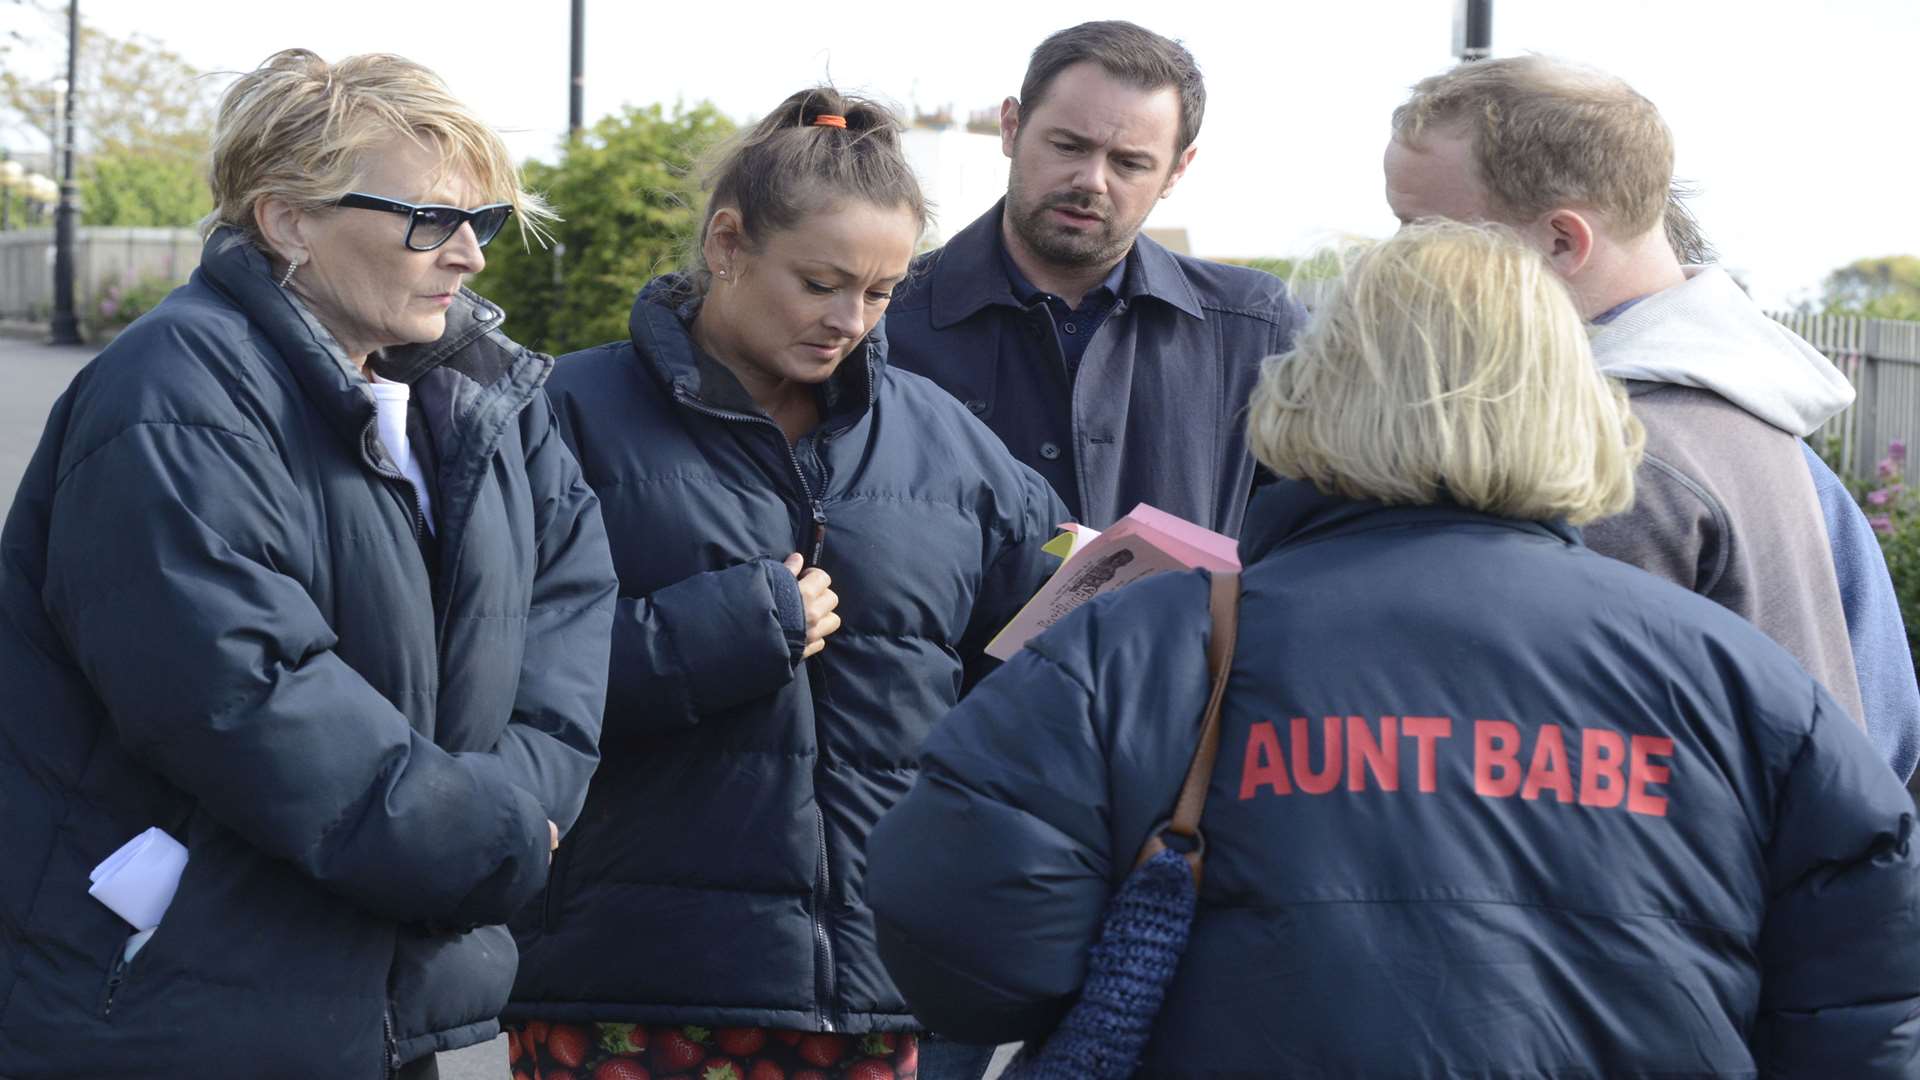 EastEnders cast and crew at the Promenade in Broadstairs.